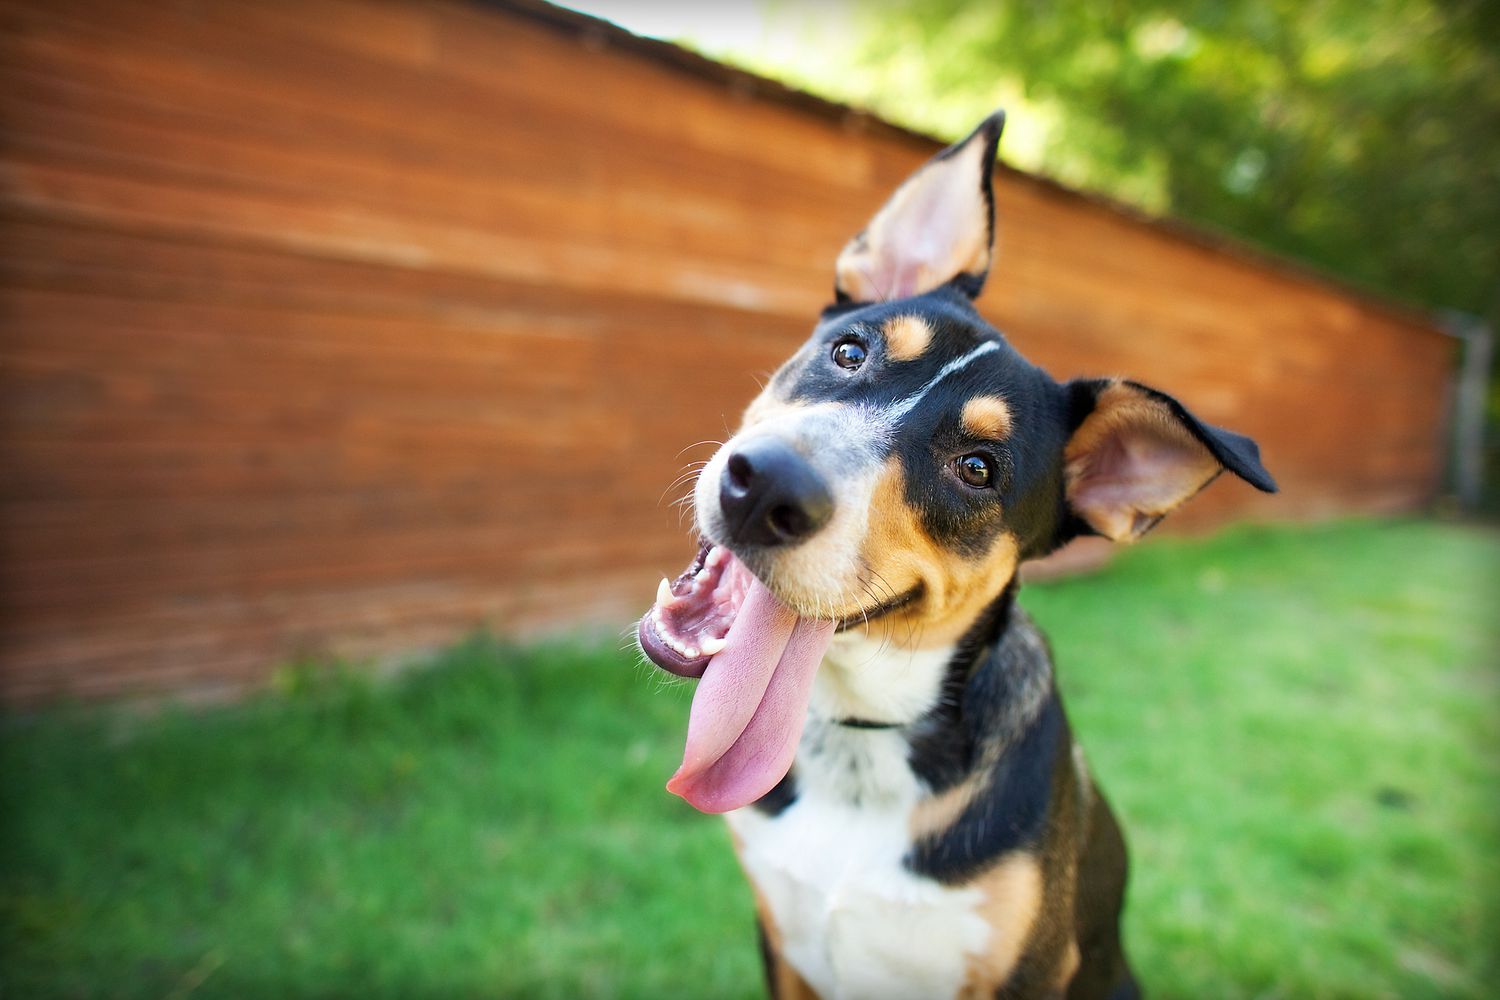 a black, tan, and white dog with large ears smiles at camera with tongue out the side